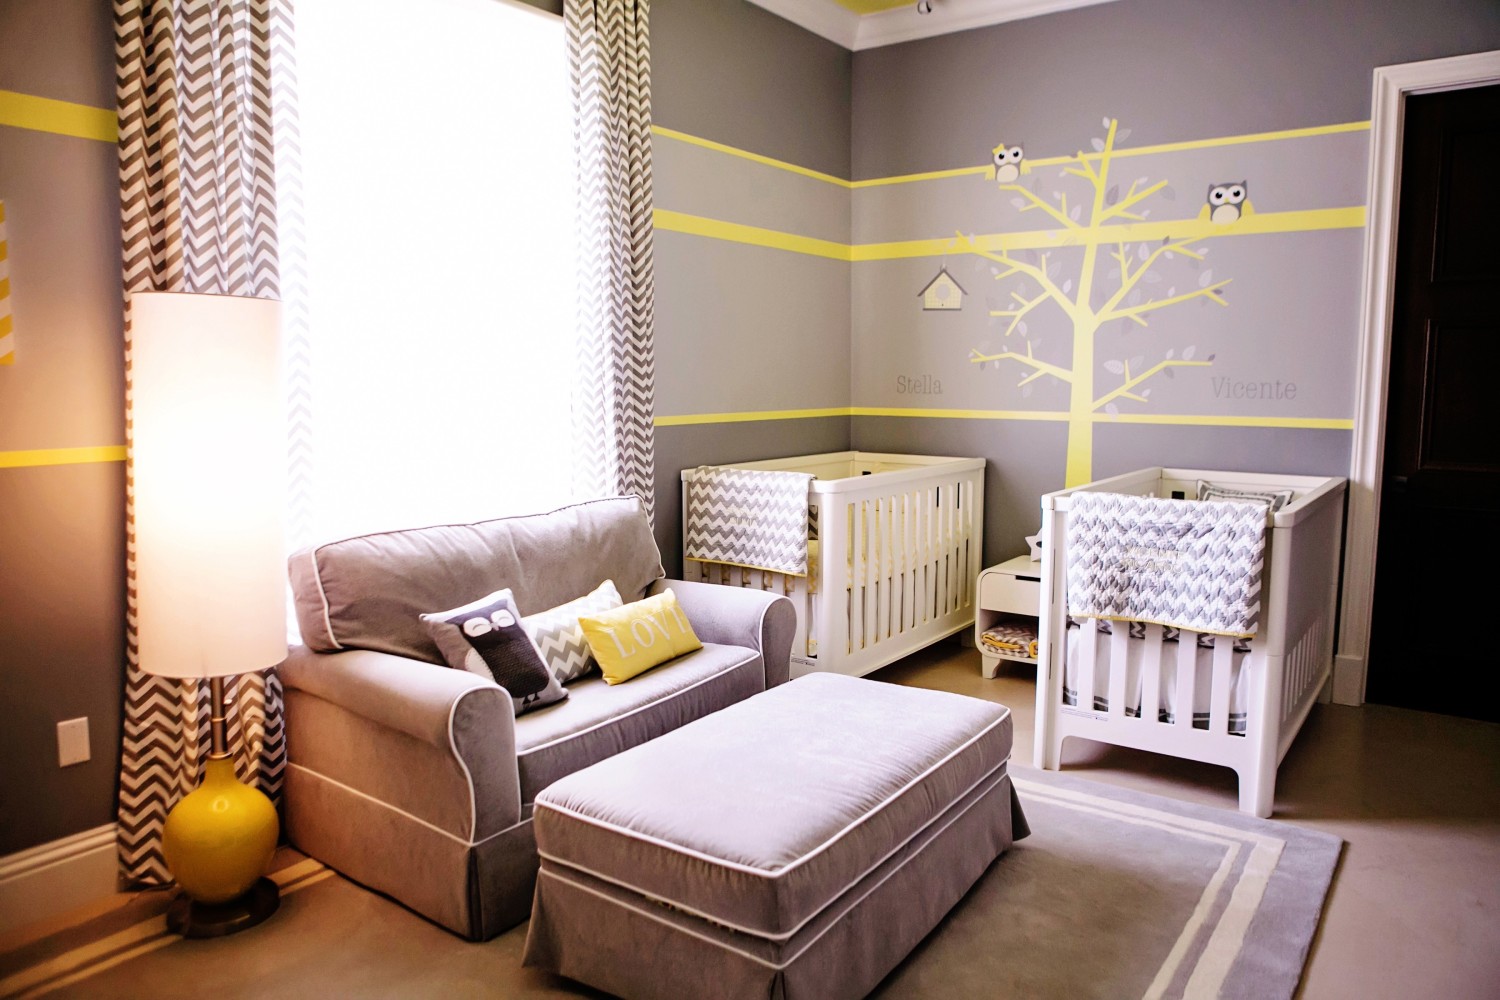 Twin-nursery-wth-a-yellow-wall-decoration-and-neutral-interior-